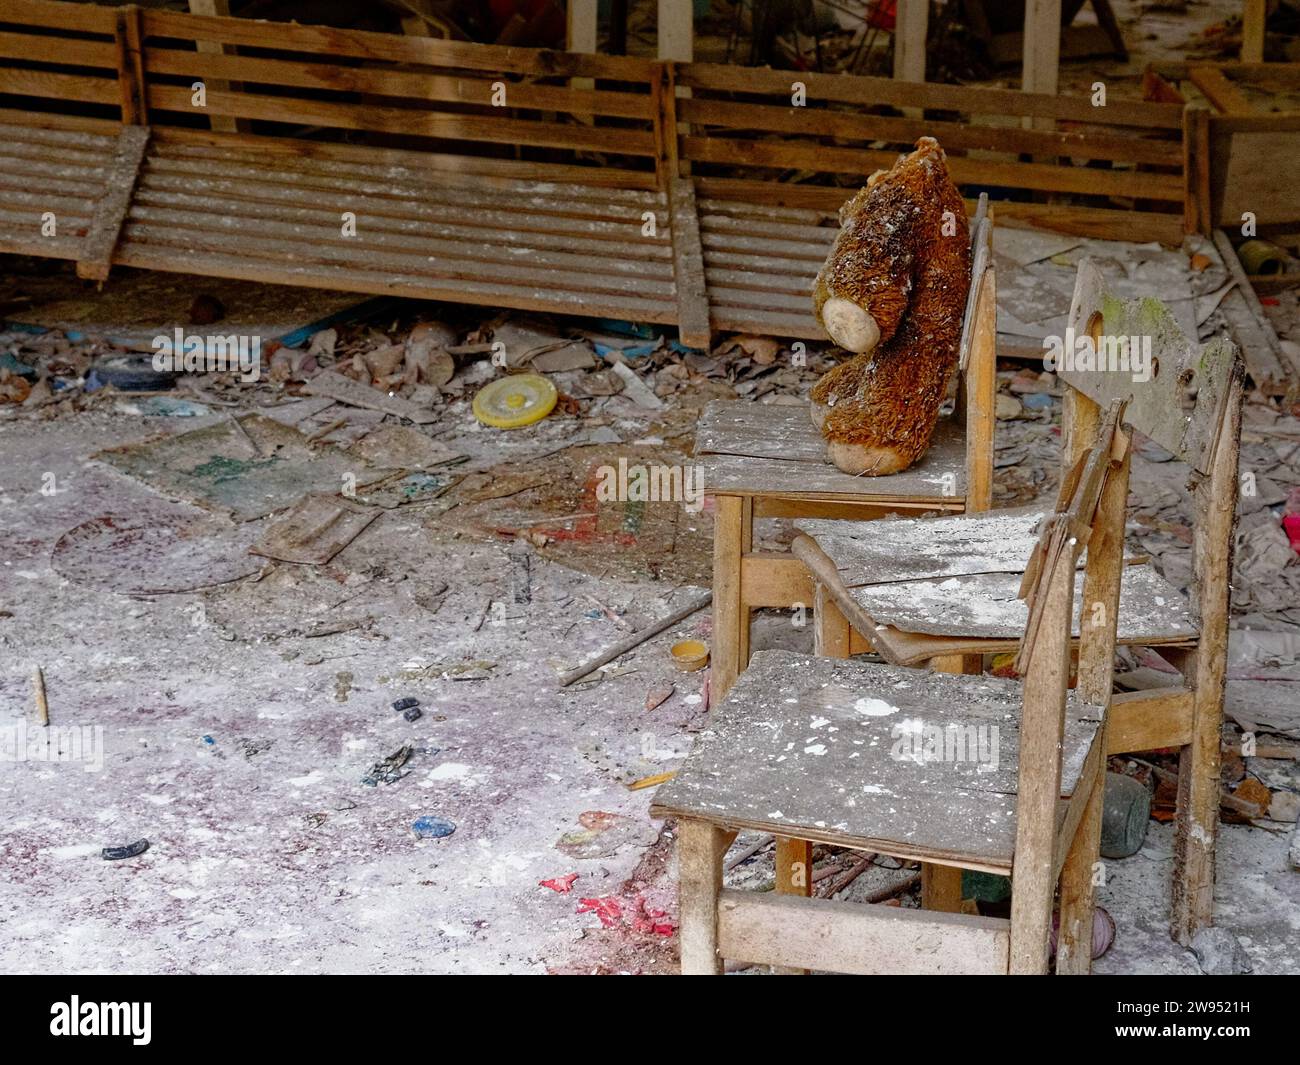 The image shows a neglected room with a teddy bear on a chair. Dirty plush toy on the chair. A headless teddy bear in an abandoned kindergarten in Pri Stock Photo